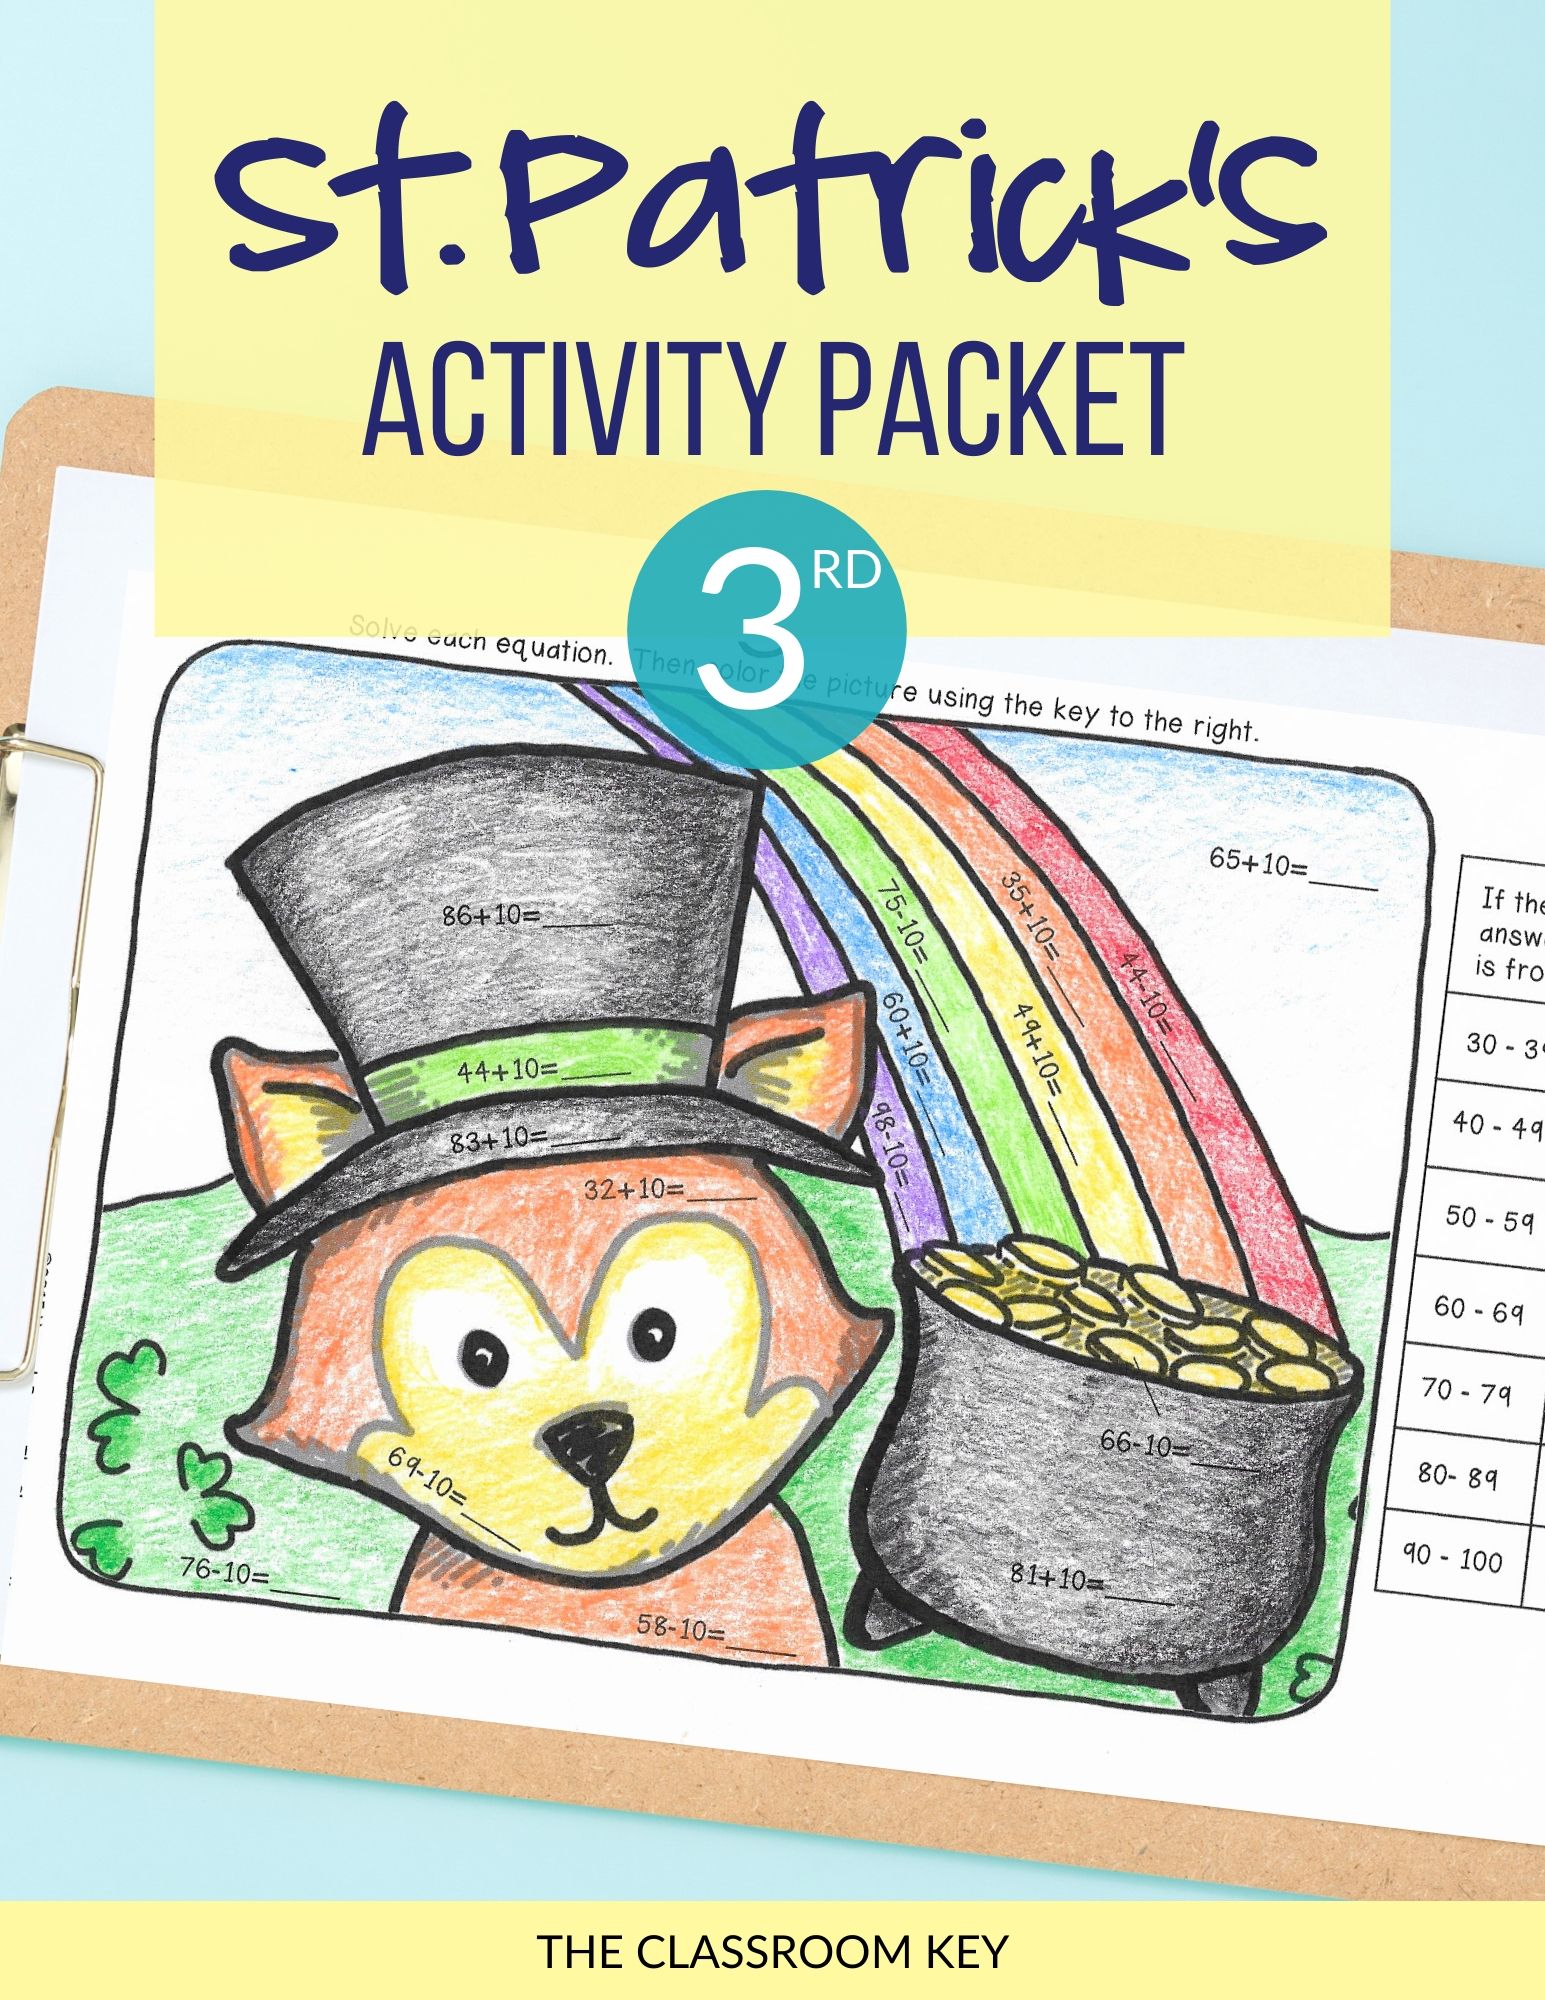 St. Patrick's Day no prep activities for 3rd grade. Review reading, writing, and math skills